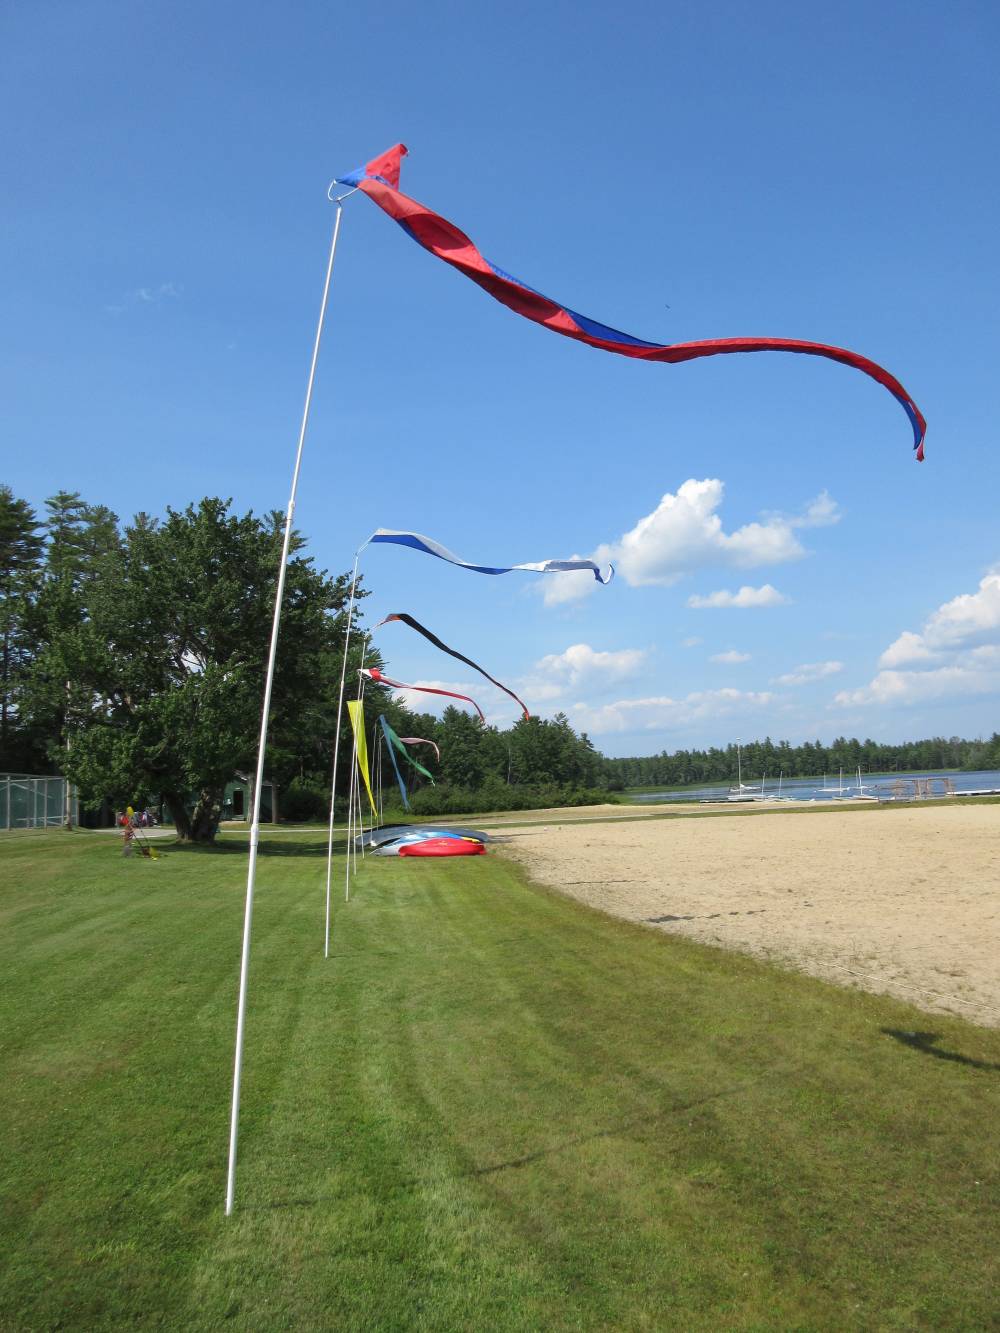 TOP MAINE BASKETBALL CAMP: Tripp Lake Camp is a Top Basketball Summer Camp located in Poland Maine offering many fun and enriching Basketball and other camp programs. 